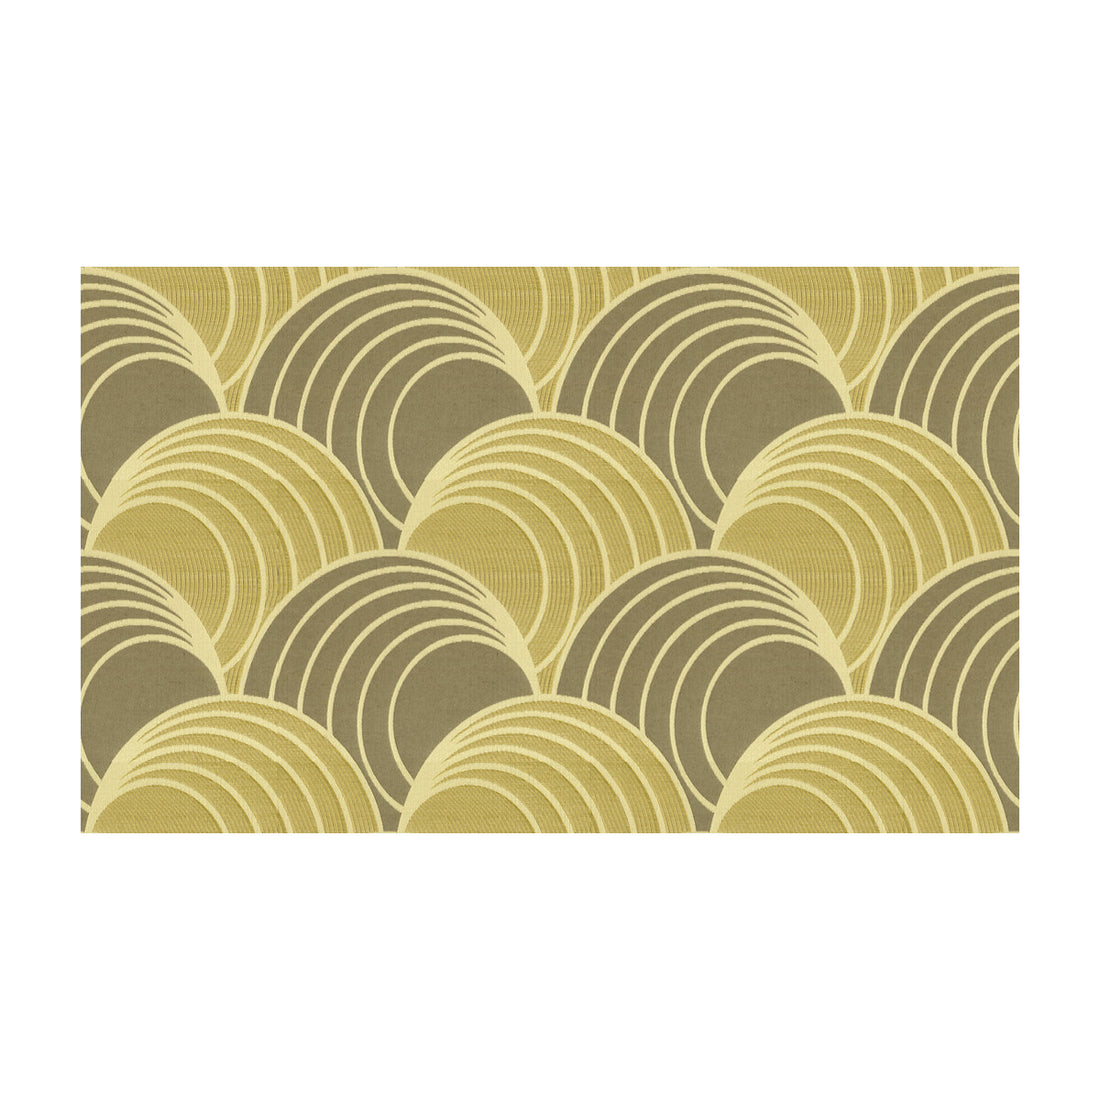 Onboard fabric in quartz color - pattern 3957.416.0 - by Kravet Contract